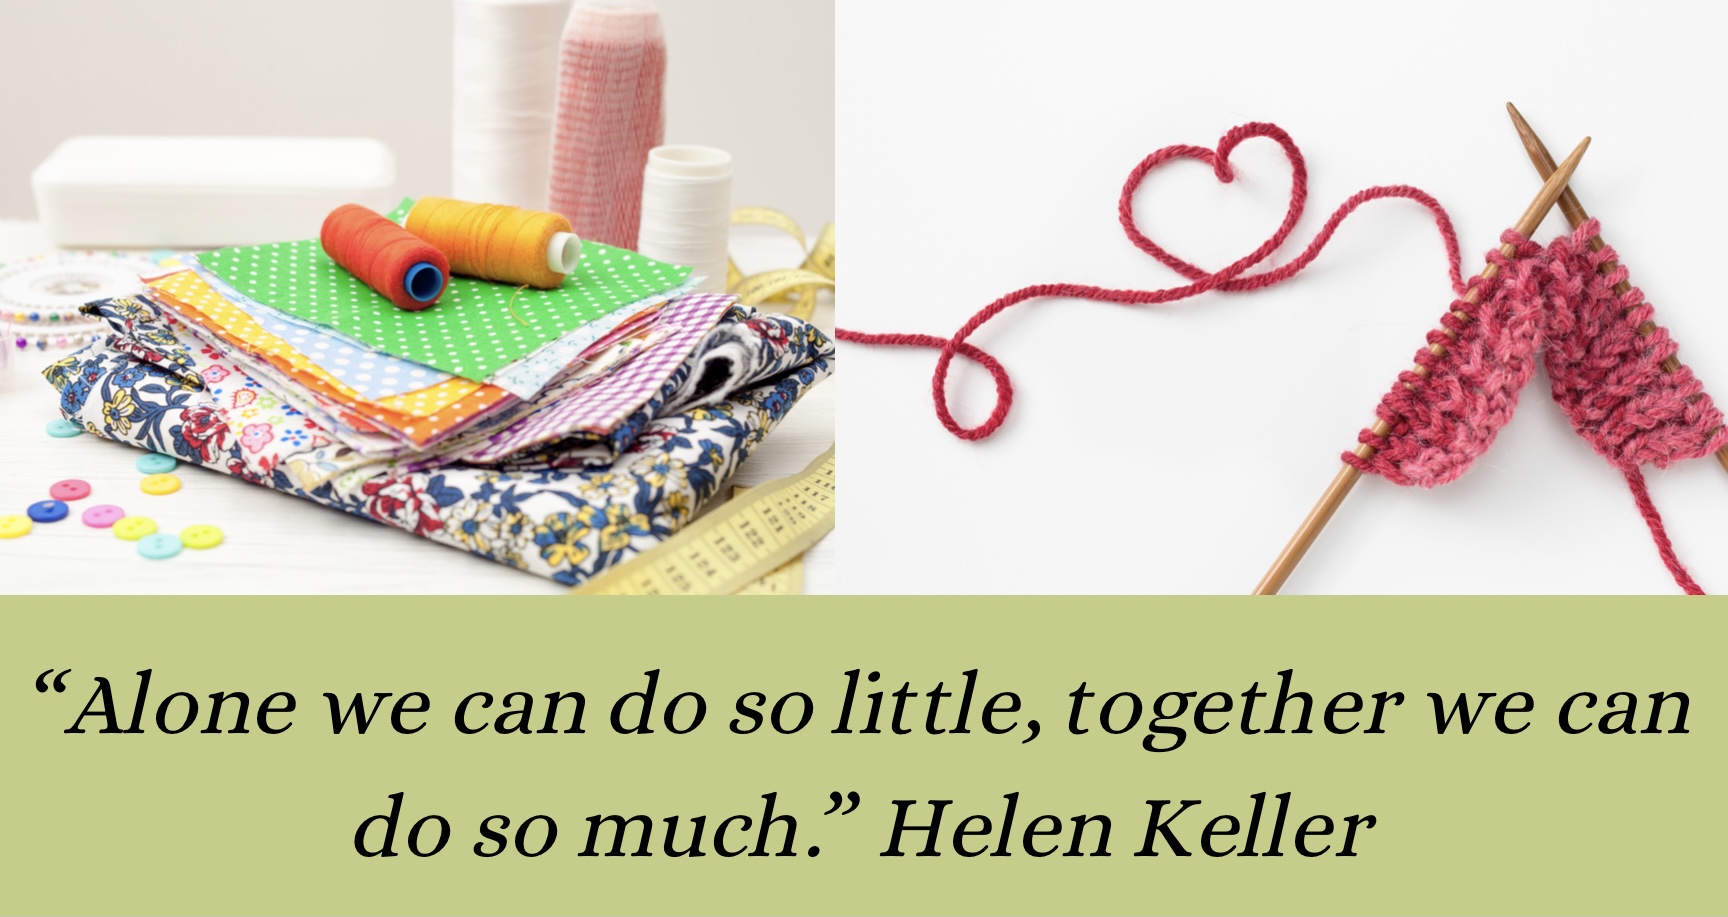 Alone we can do so little together we can do so much - Helen Keller